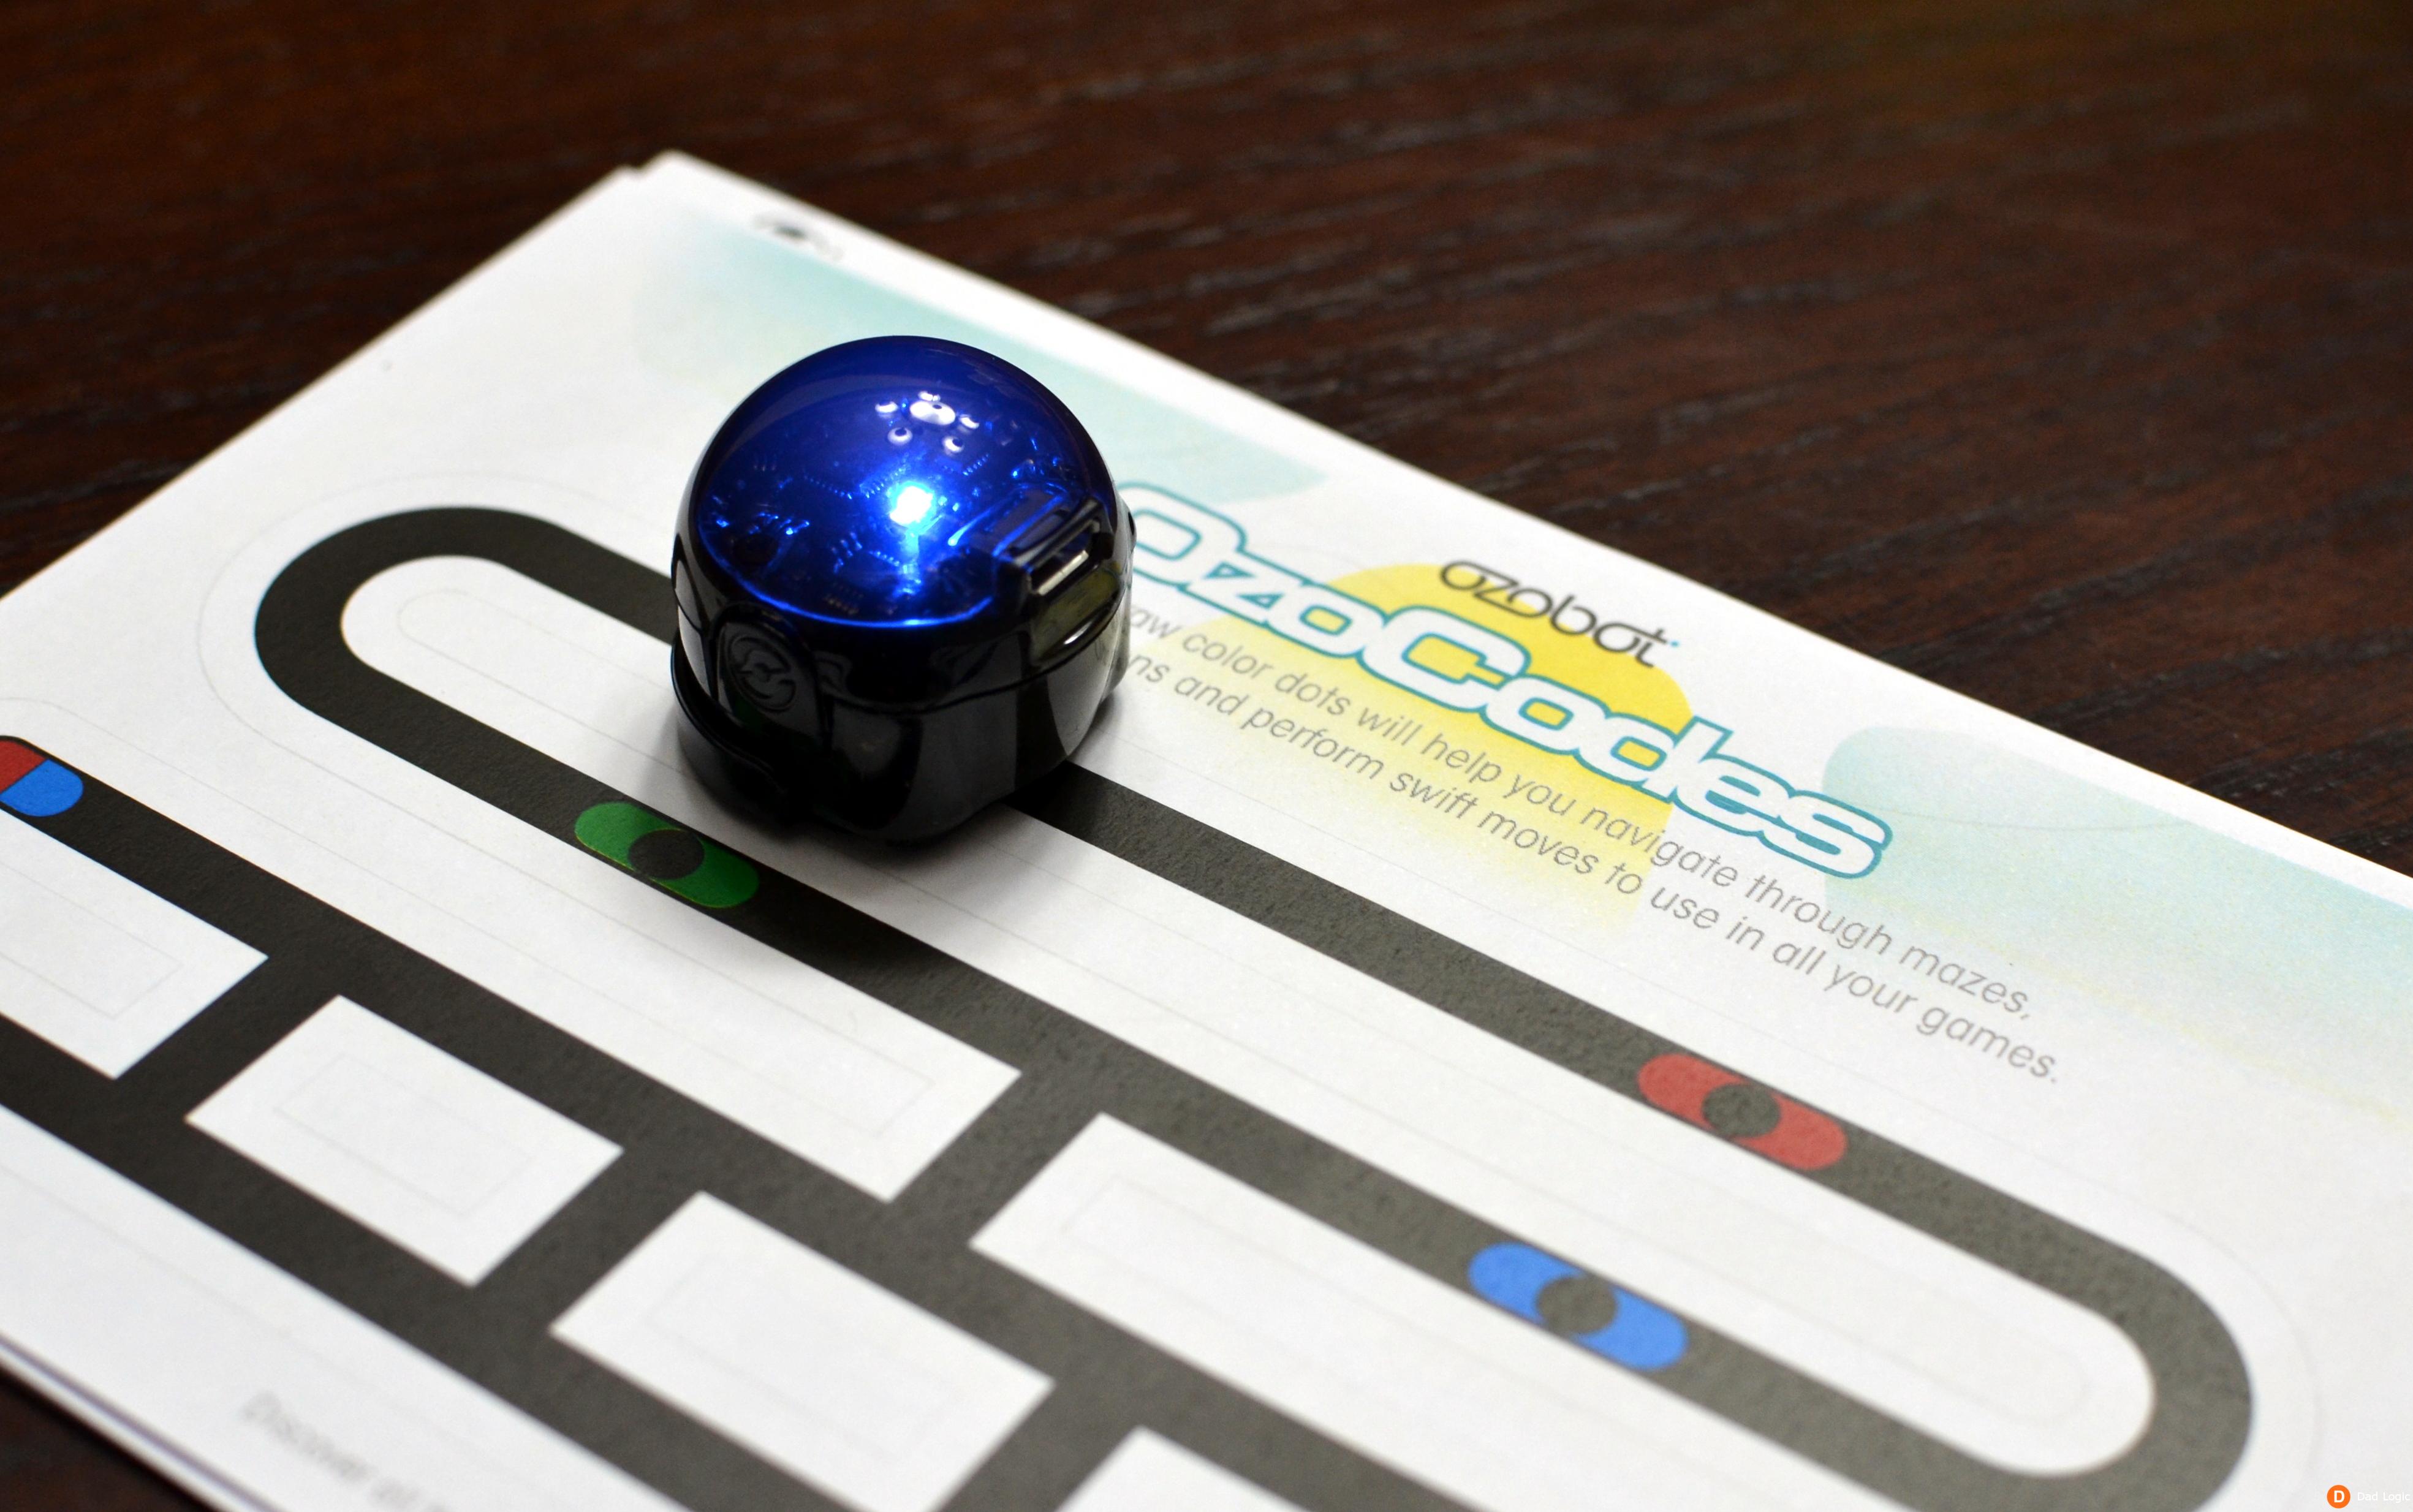 Ozobot Bit is an Amazing Little Robot Your Child Can Program - Dad Logic